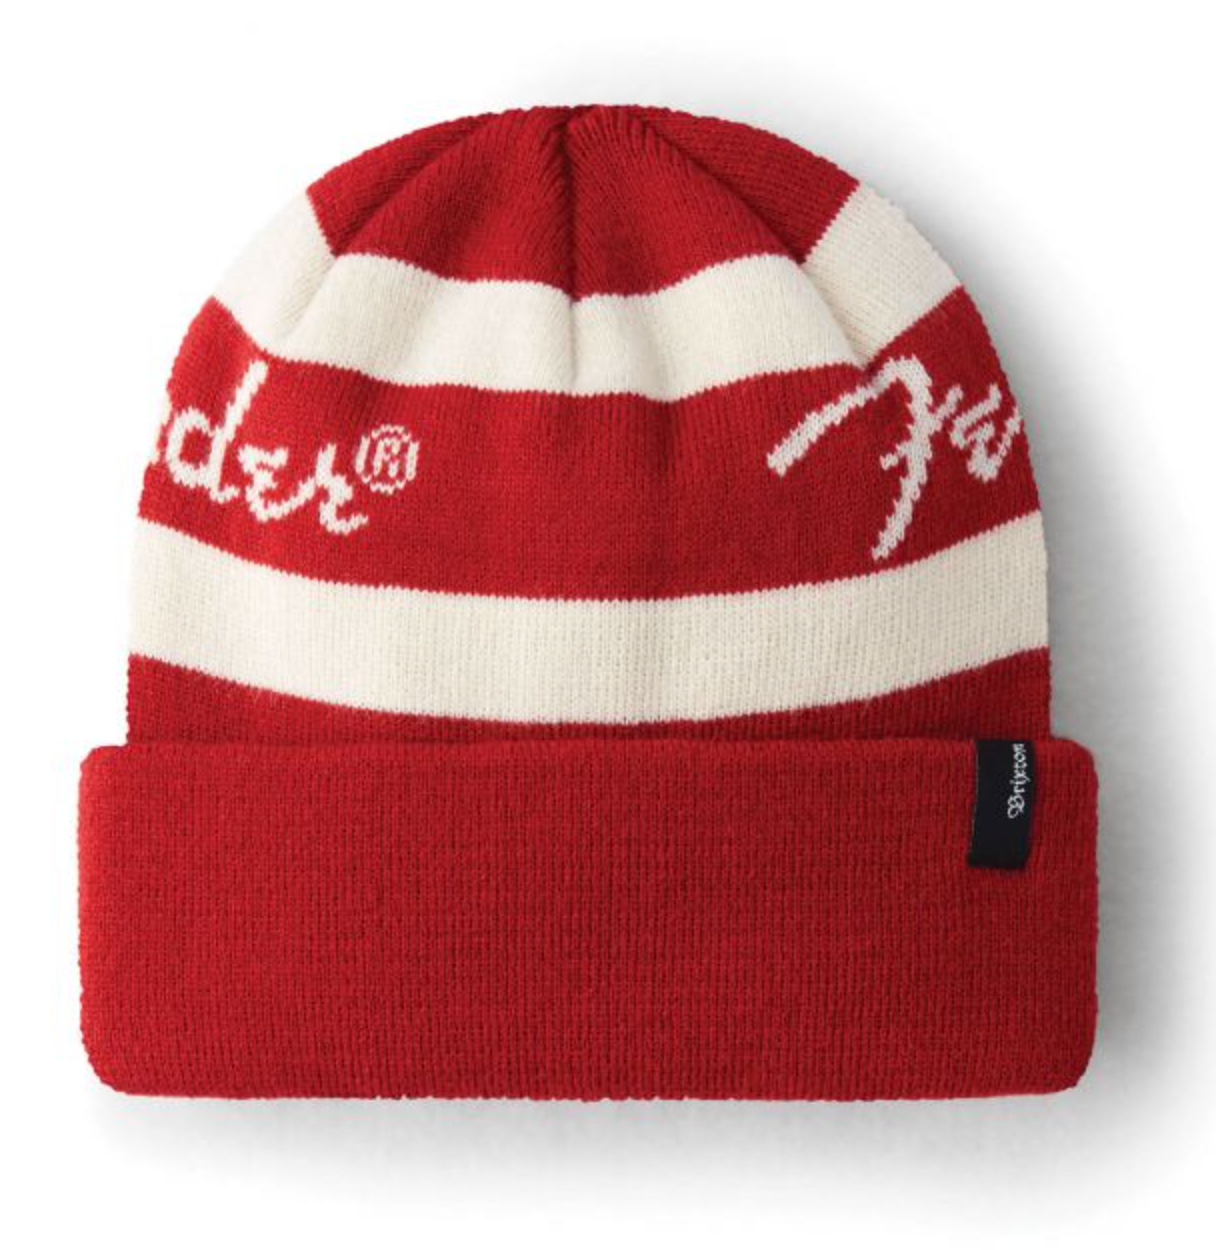 Brixton x Fender Sonic Beanie - Candy Apple Red